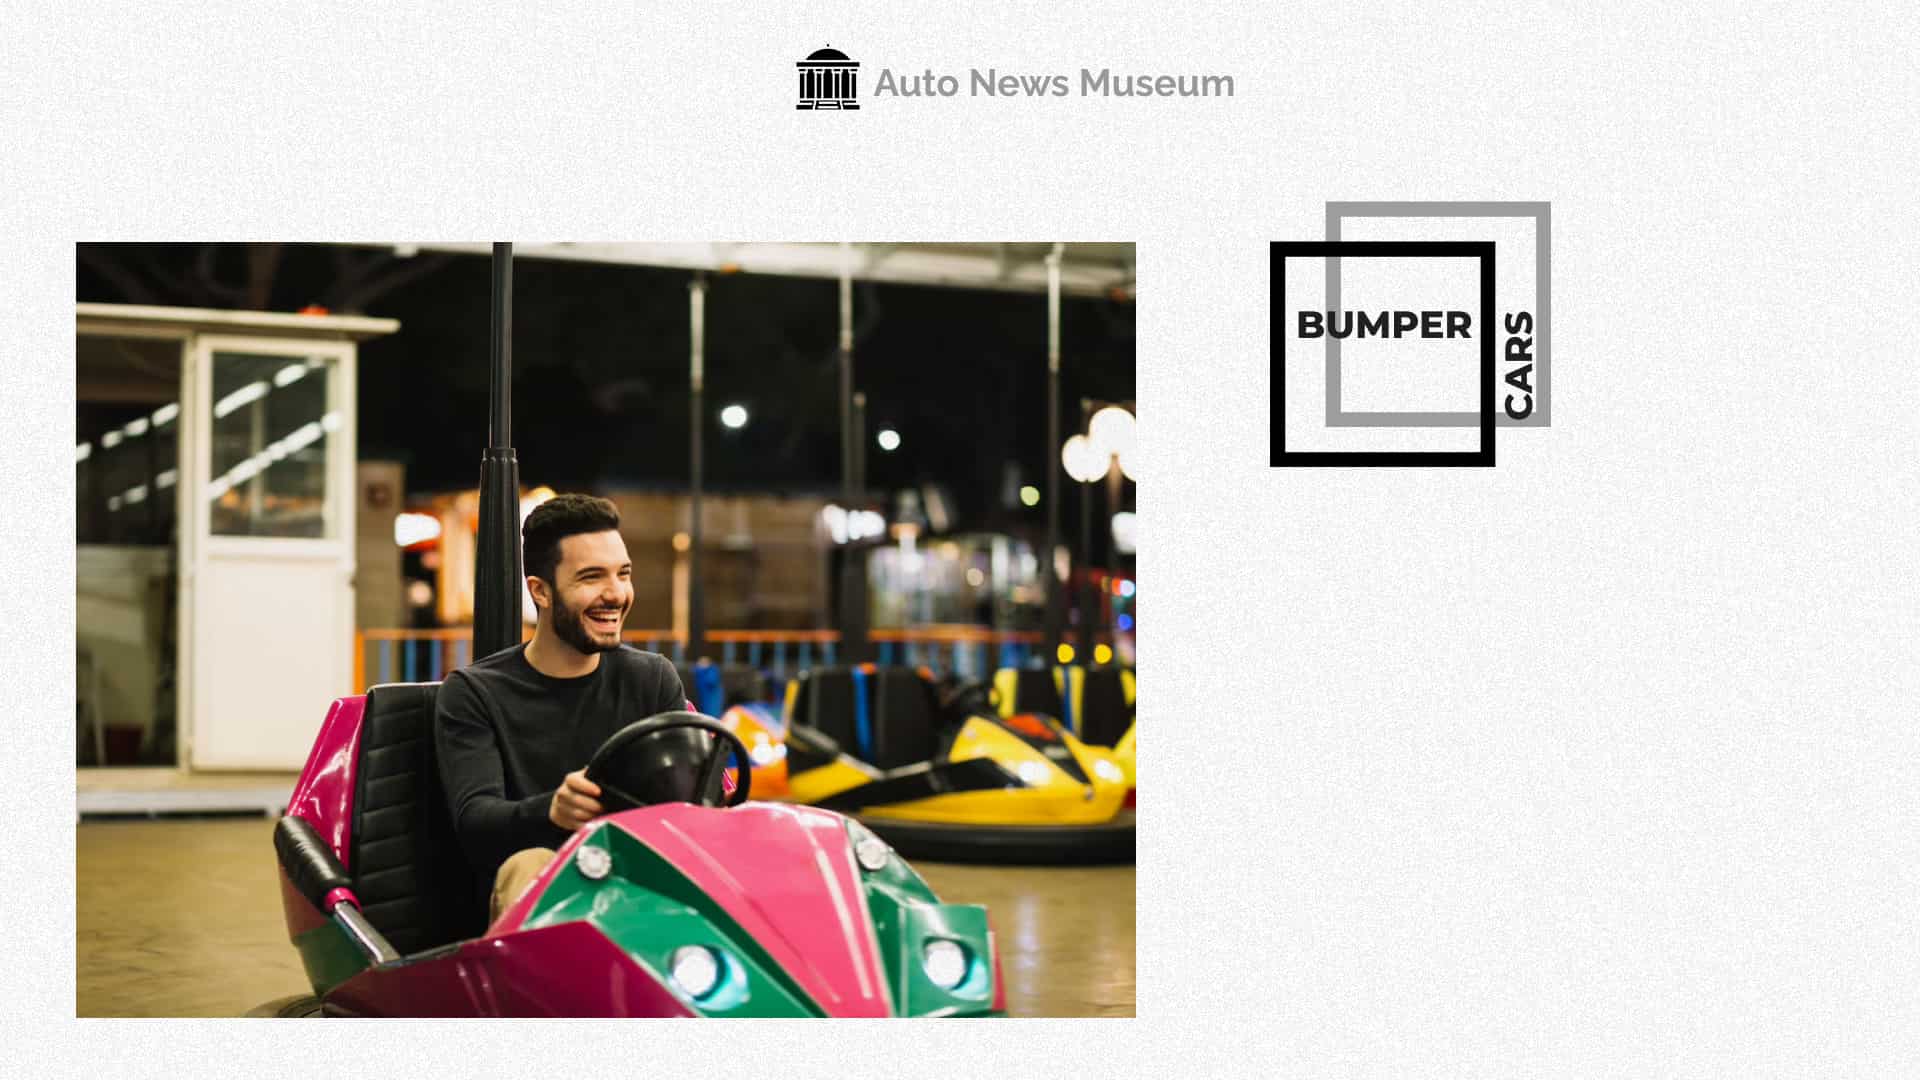 Bumper Cars: From Simple Joys to Scientific Marvels